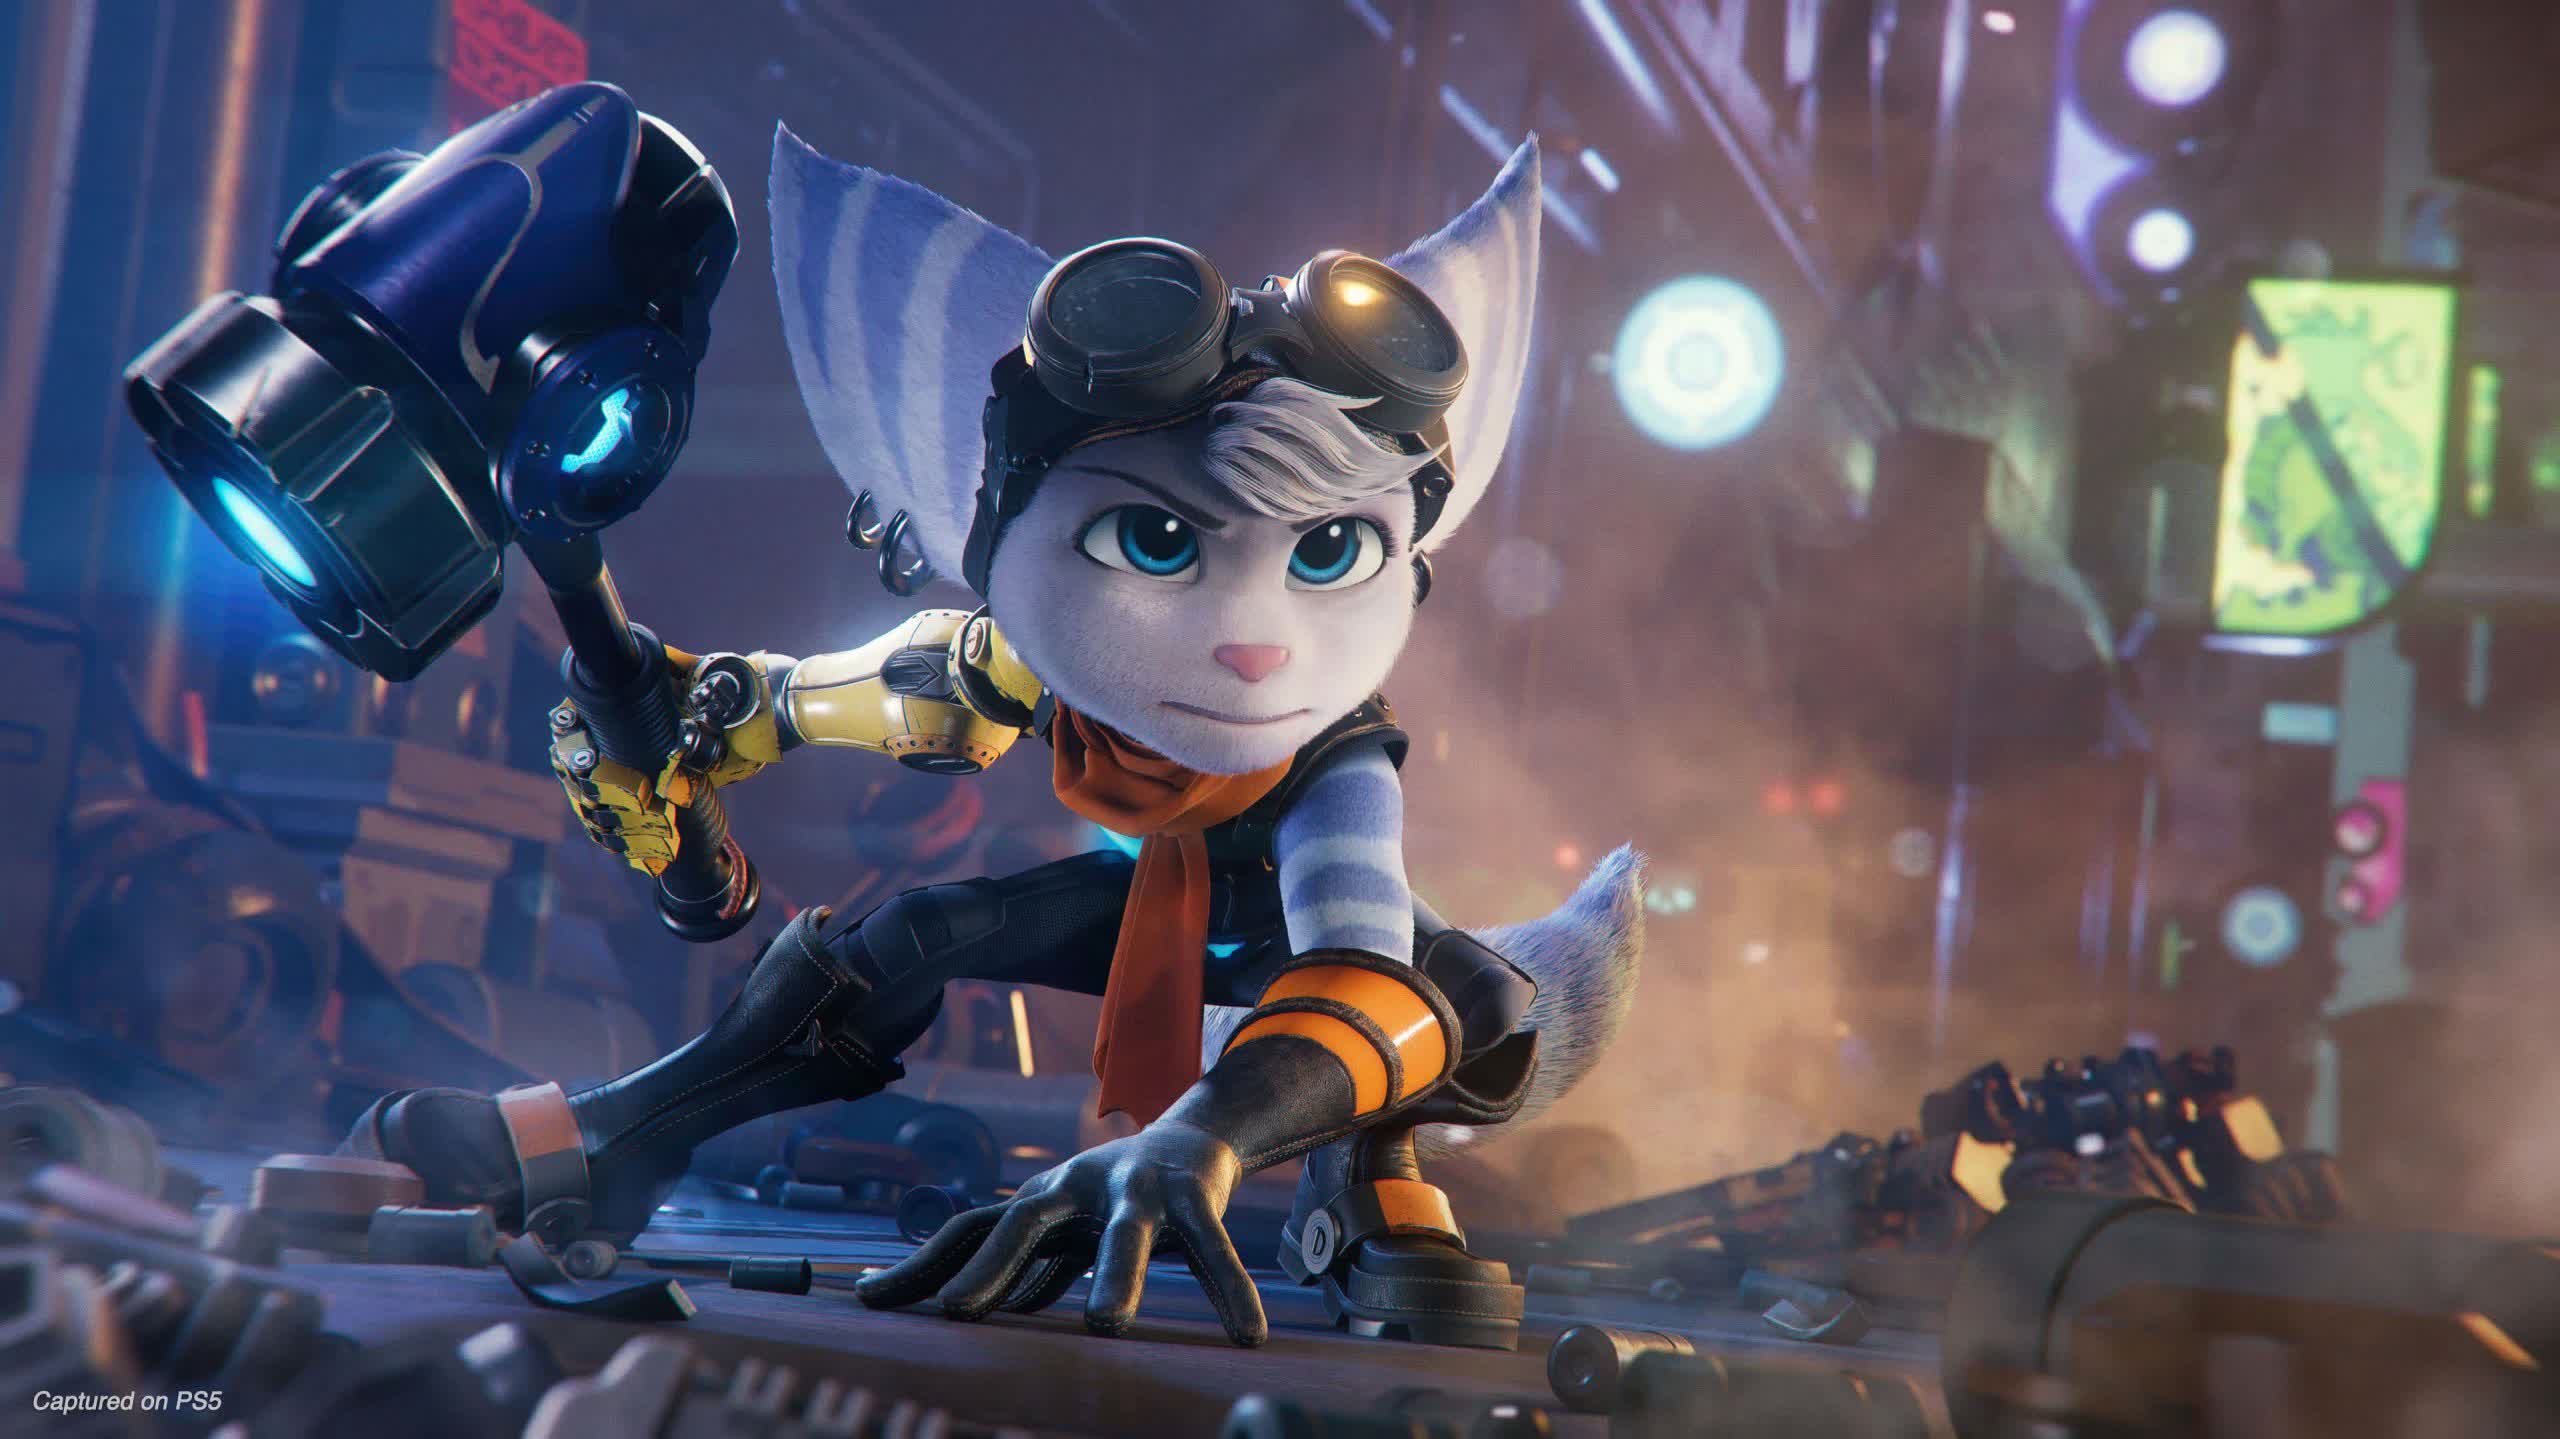 Ratchet & Clank: Rift Apart leads the 25th DICE Awards with nine nominations